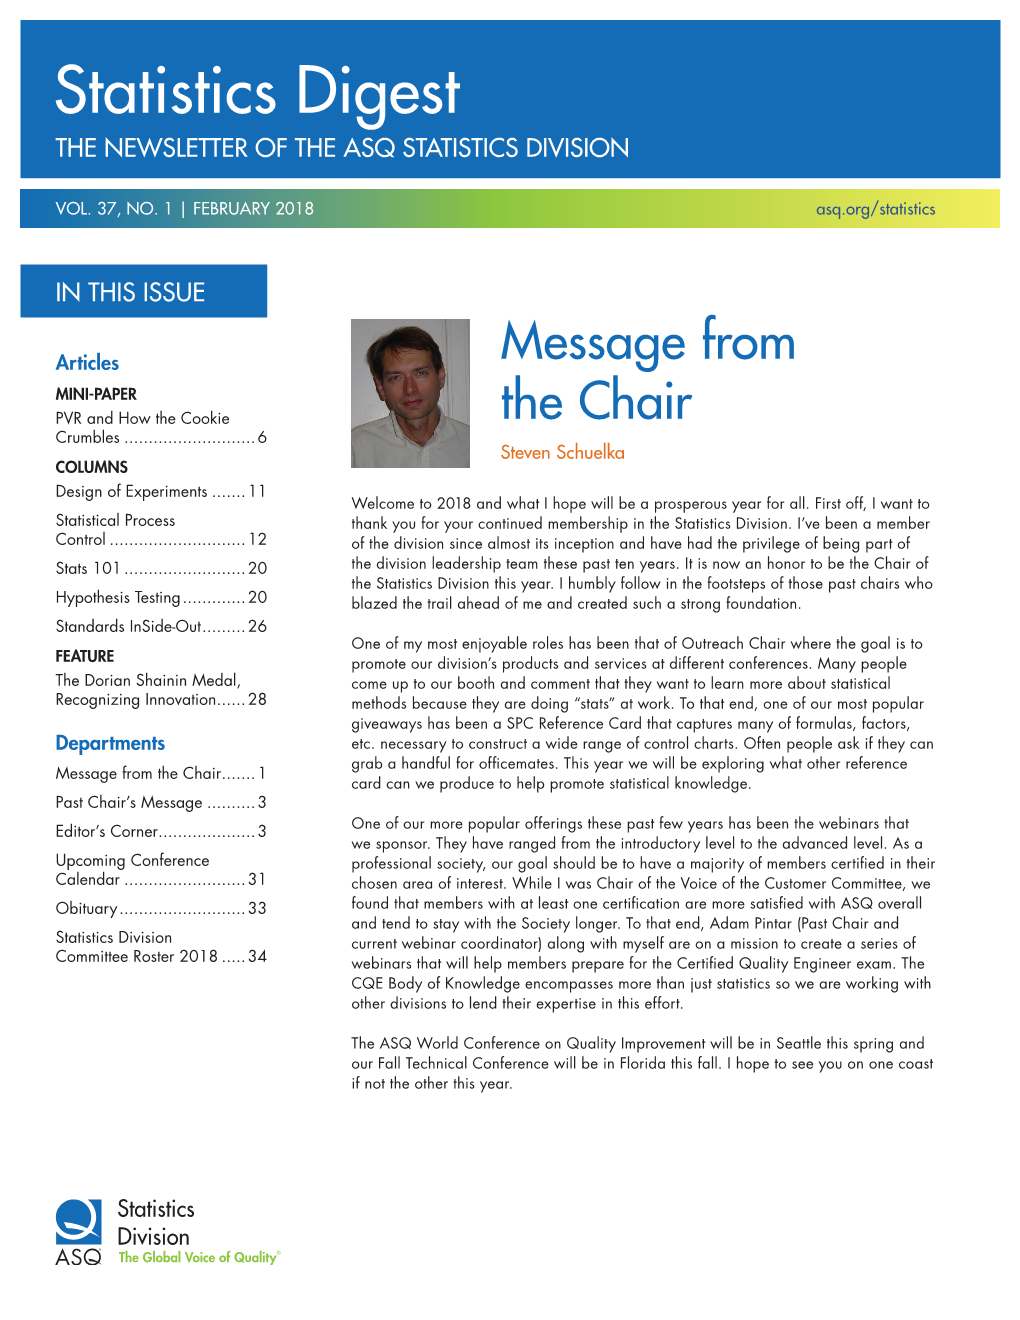 Statistics Digest the NEWSLETTER of the ASQ STATISTICS DIVISION